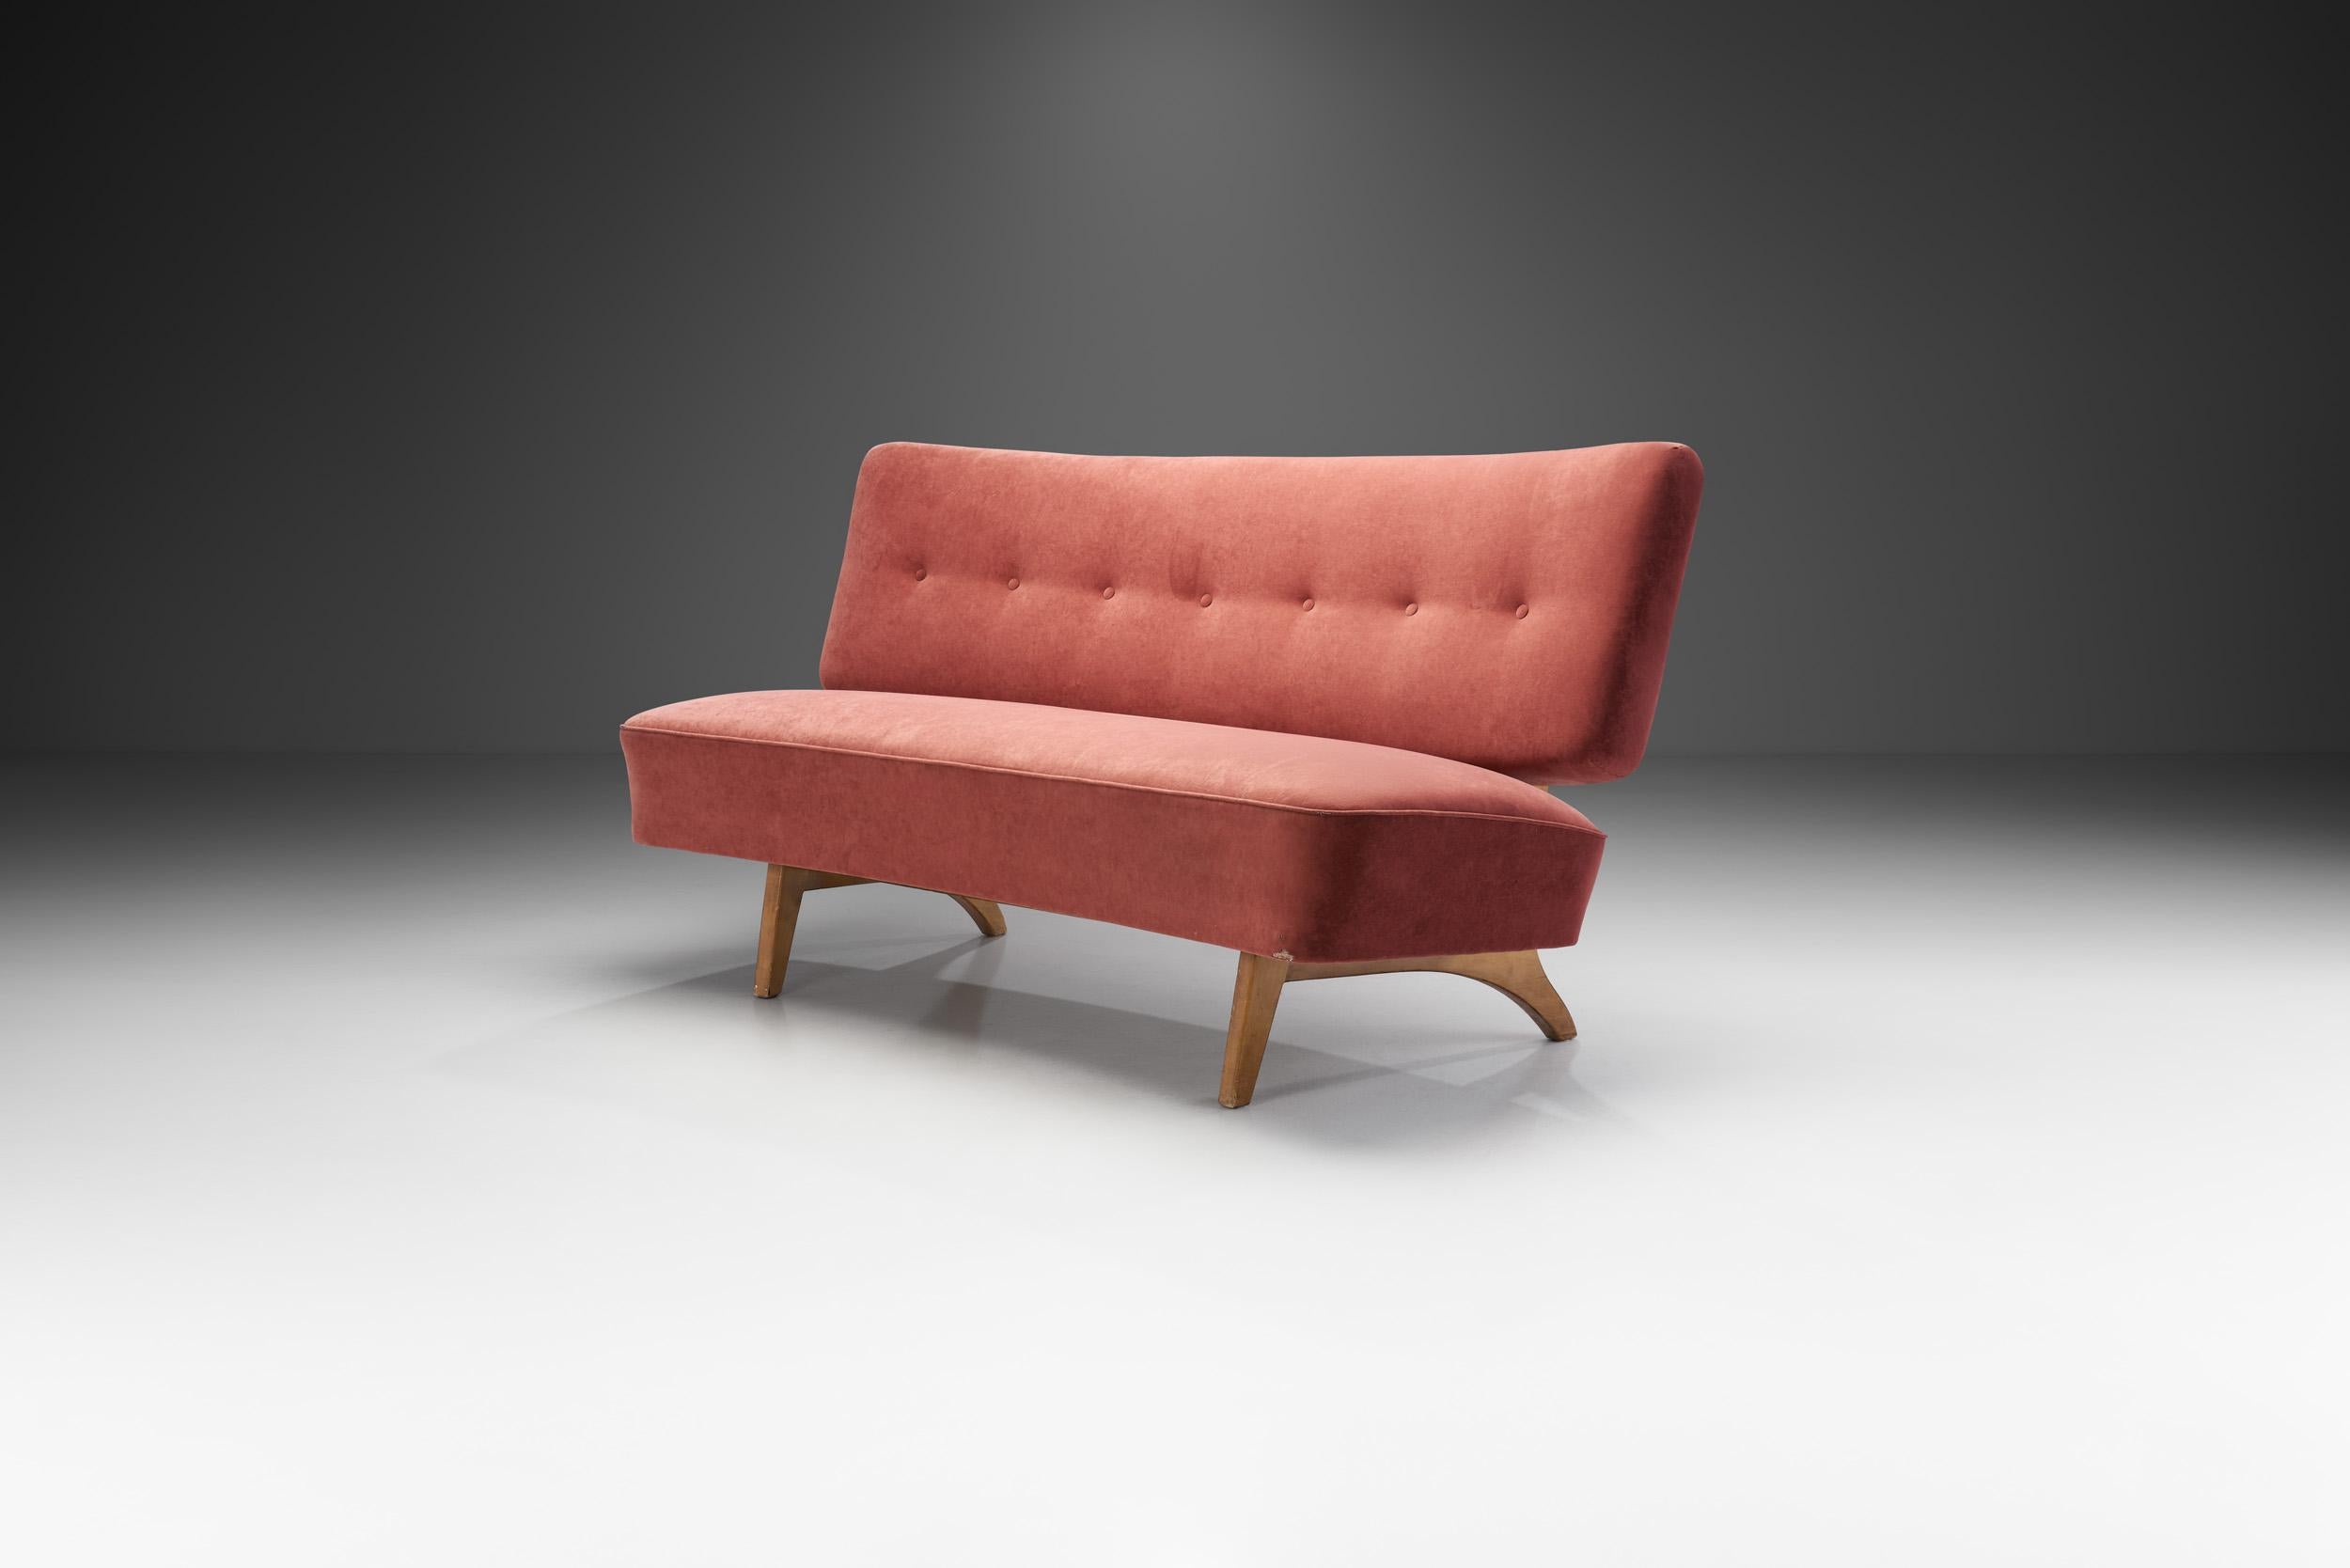 This wonderful commemoration of Finnish mid-century design is the Susanna sofa created by Lahti Lepokaulusto and designed in the 1950s by Oiva Parviainen. Famous for its suspension and structure, this model quickly became beloved in Finland. 

Due